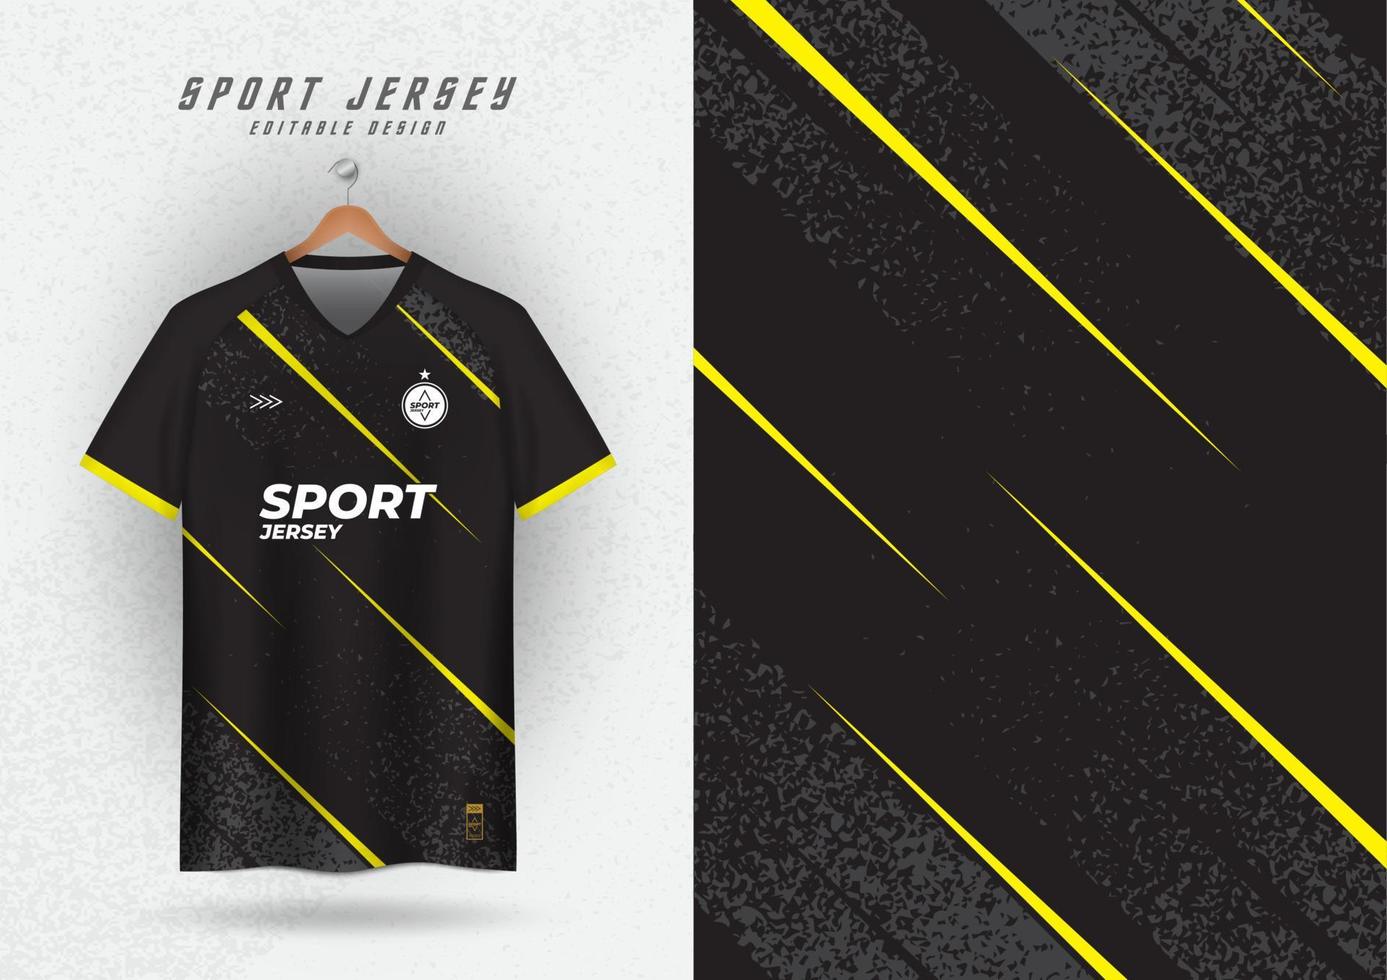 Background for sports jersey, soccer jersey, running jersey, racing jersey, grain pattern, black and yellow vector